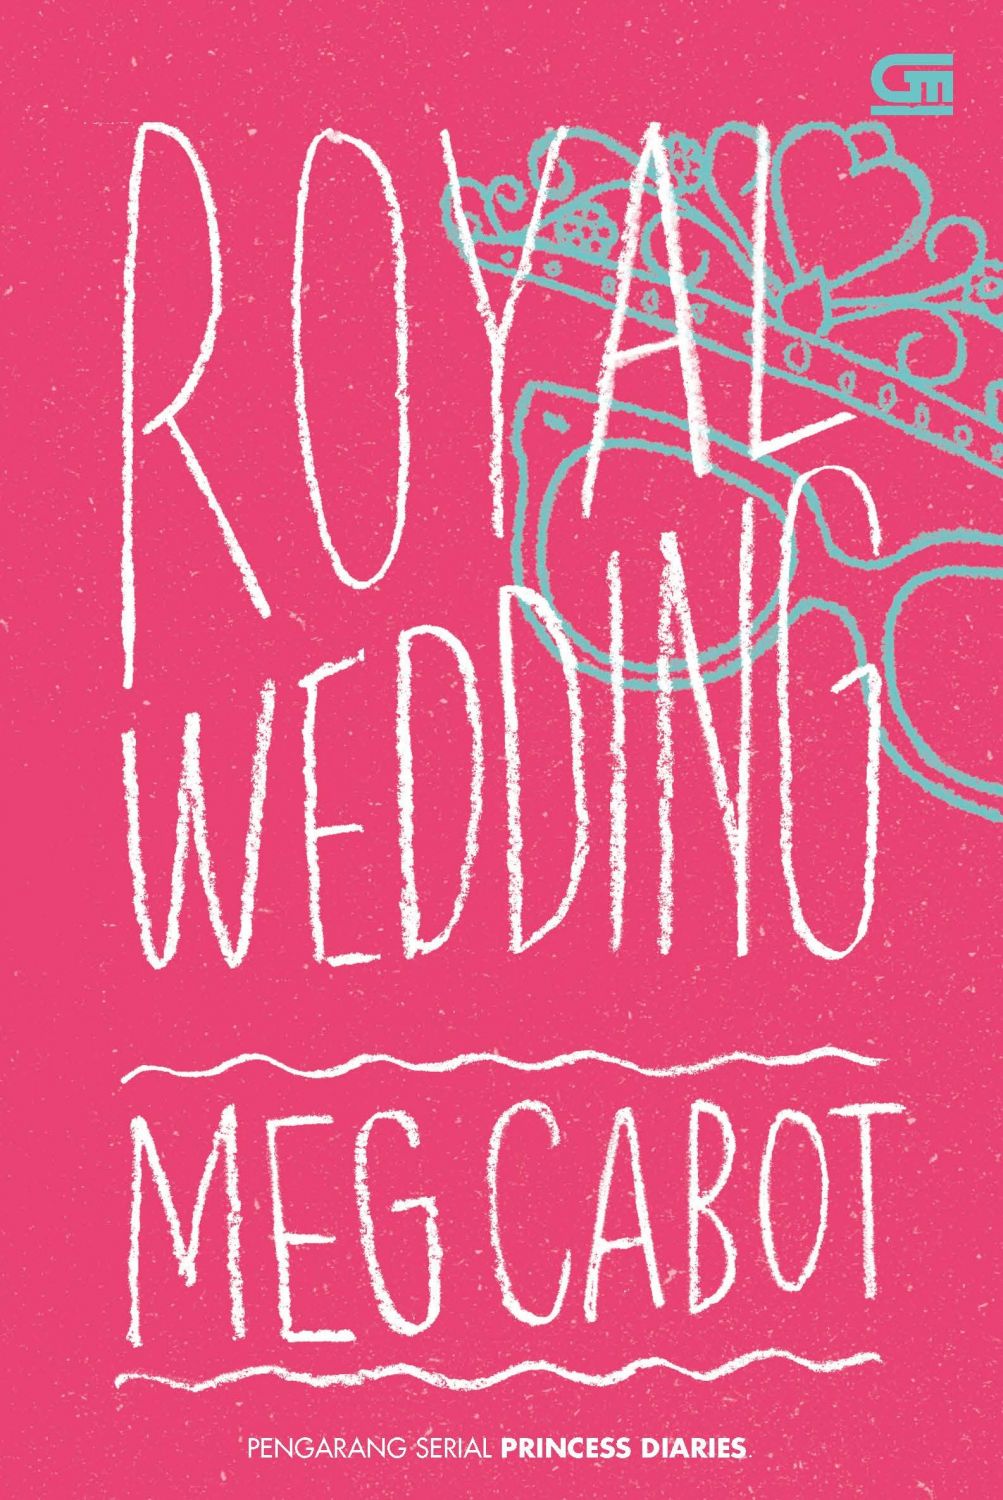 Photo for the royal wedding by meg cabot